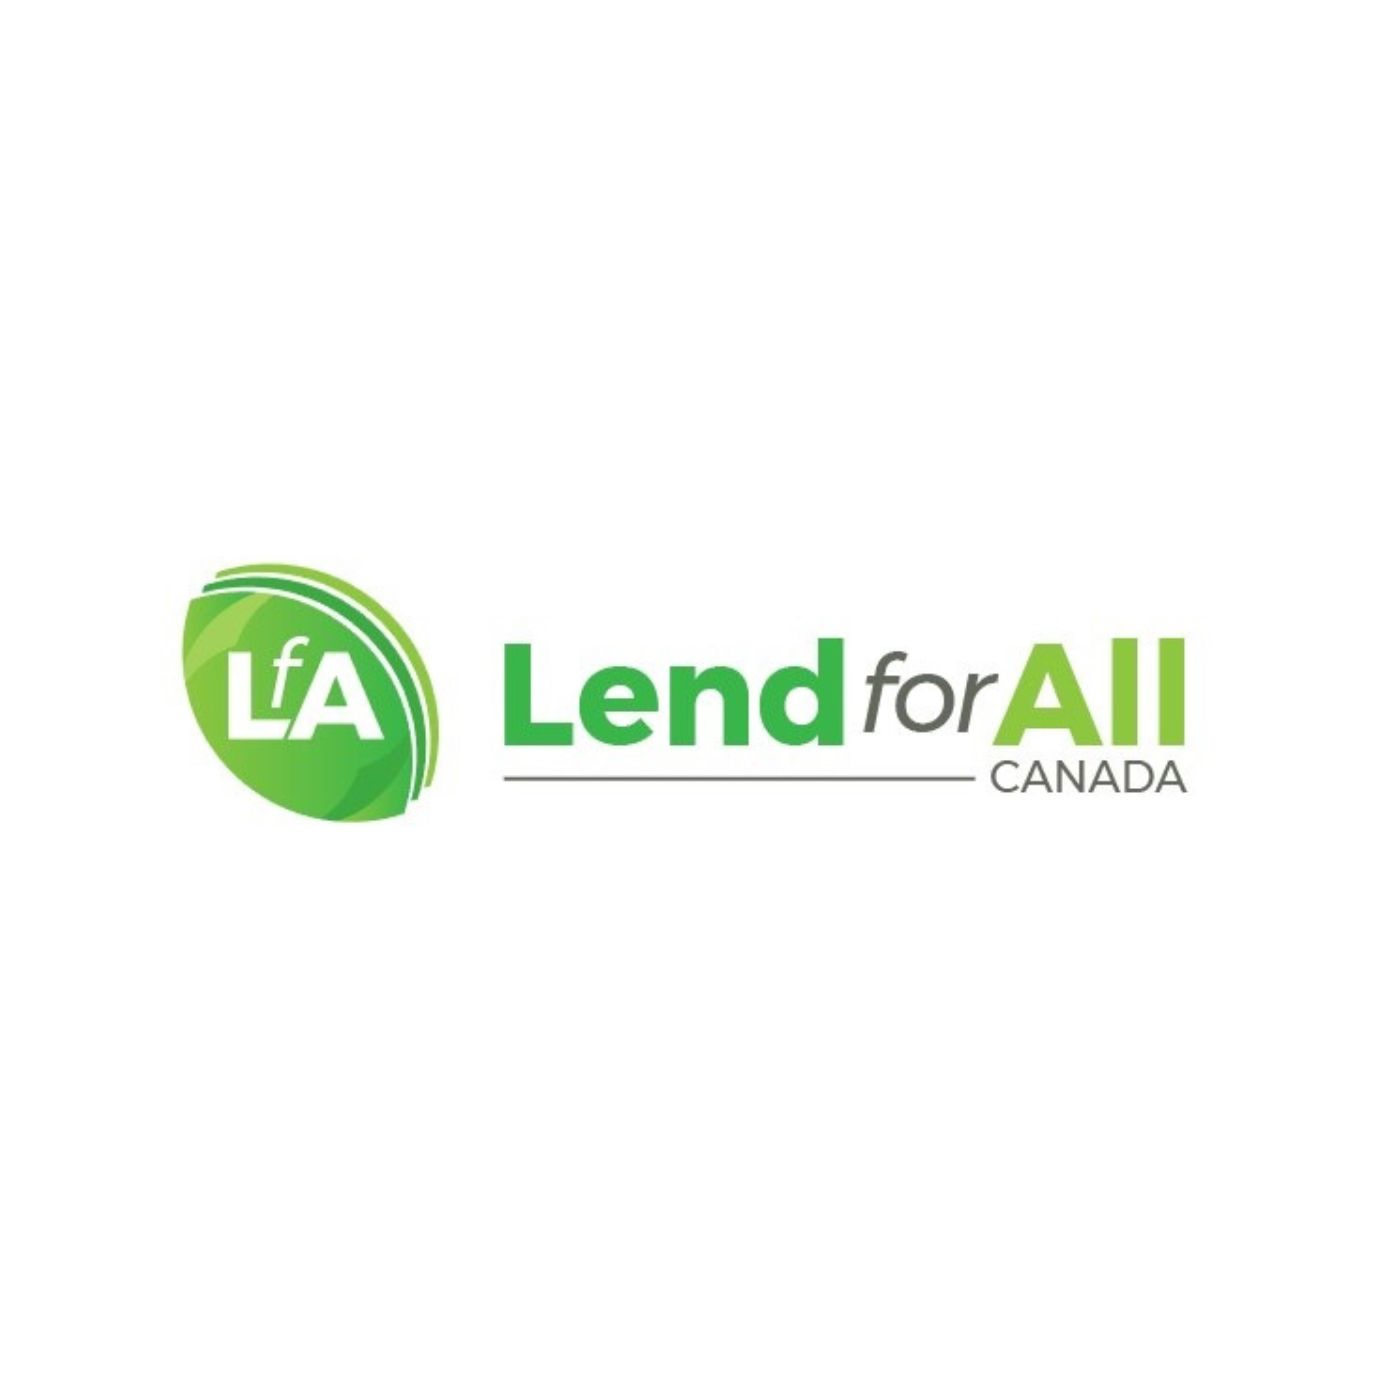 Lend for All Canada